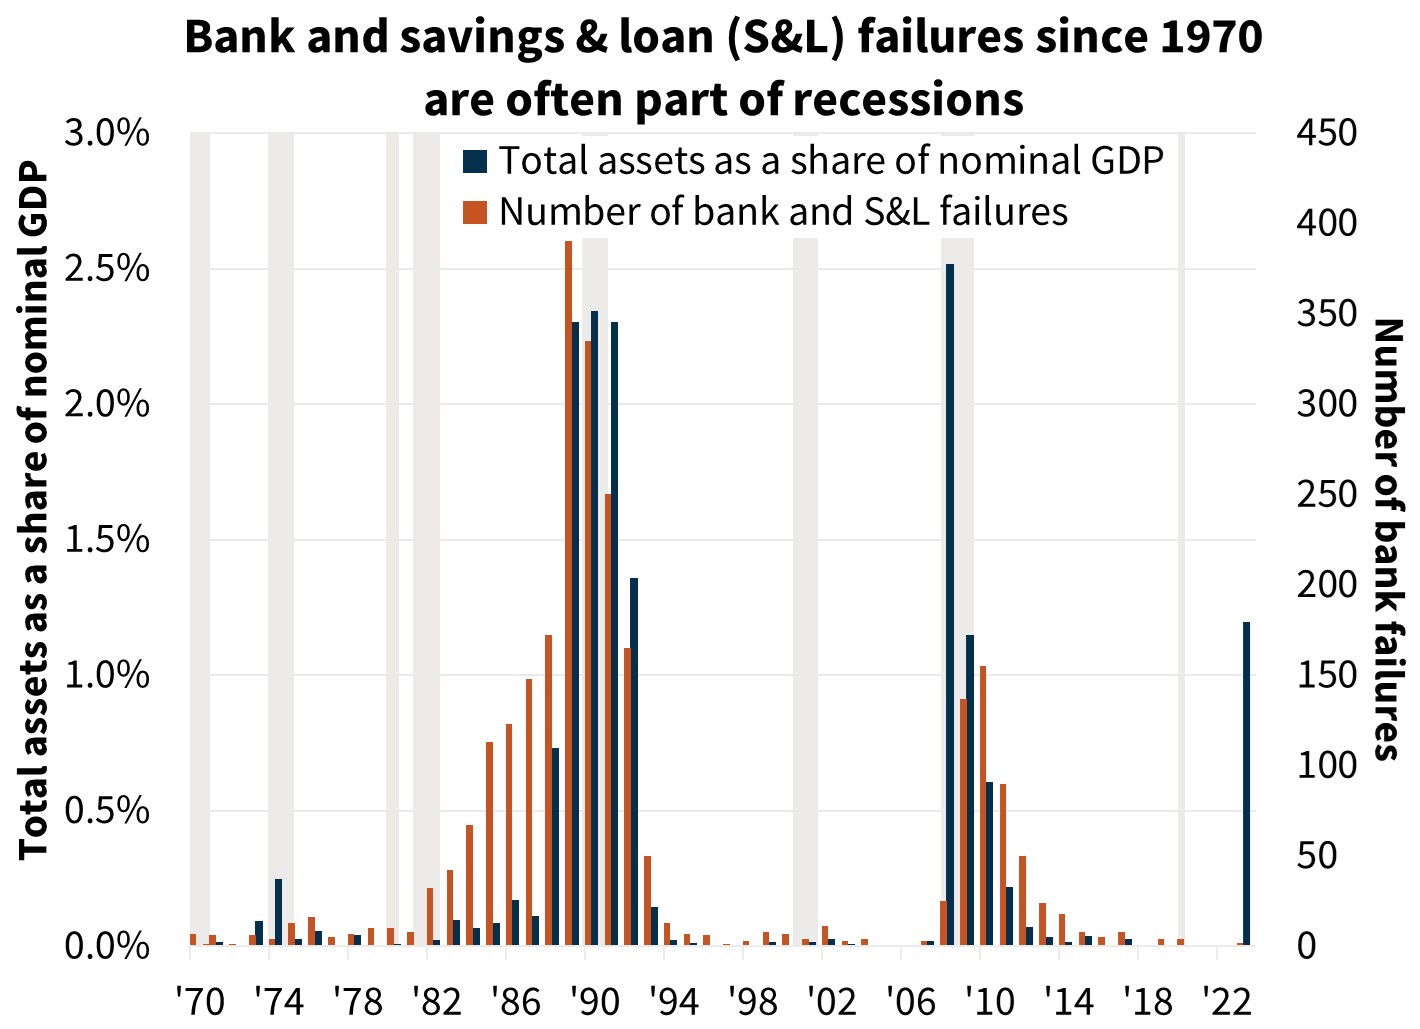  Bank and savings & loan (S&L) failures since 1970 are often part of recessions 